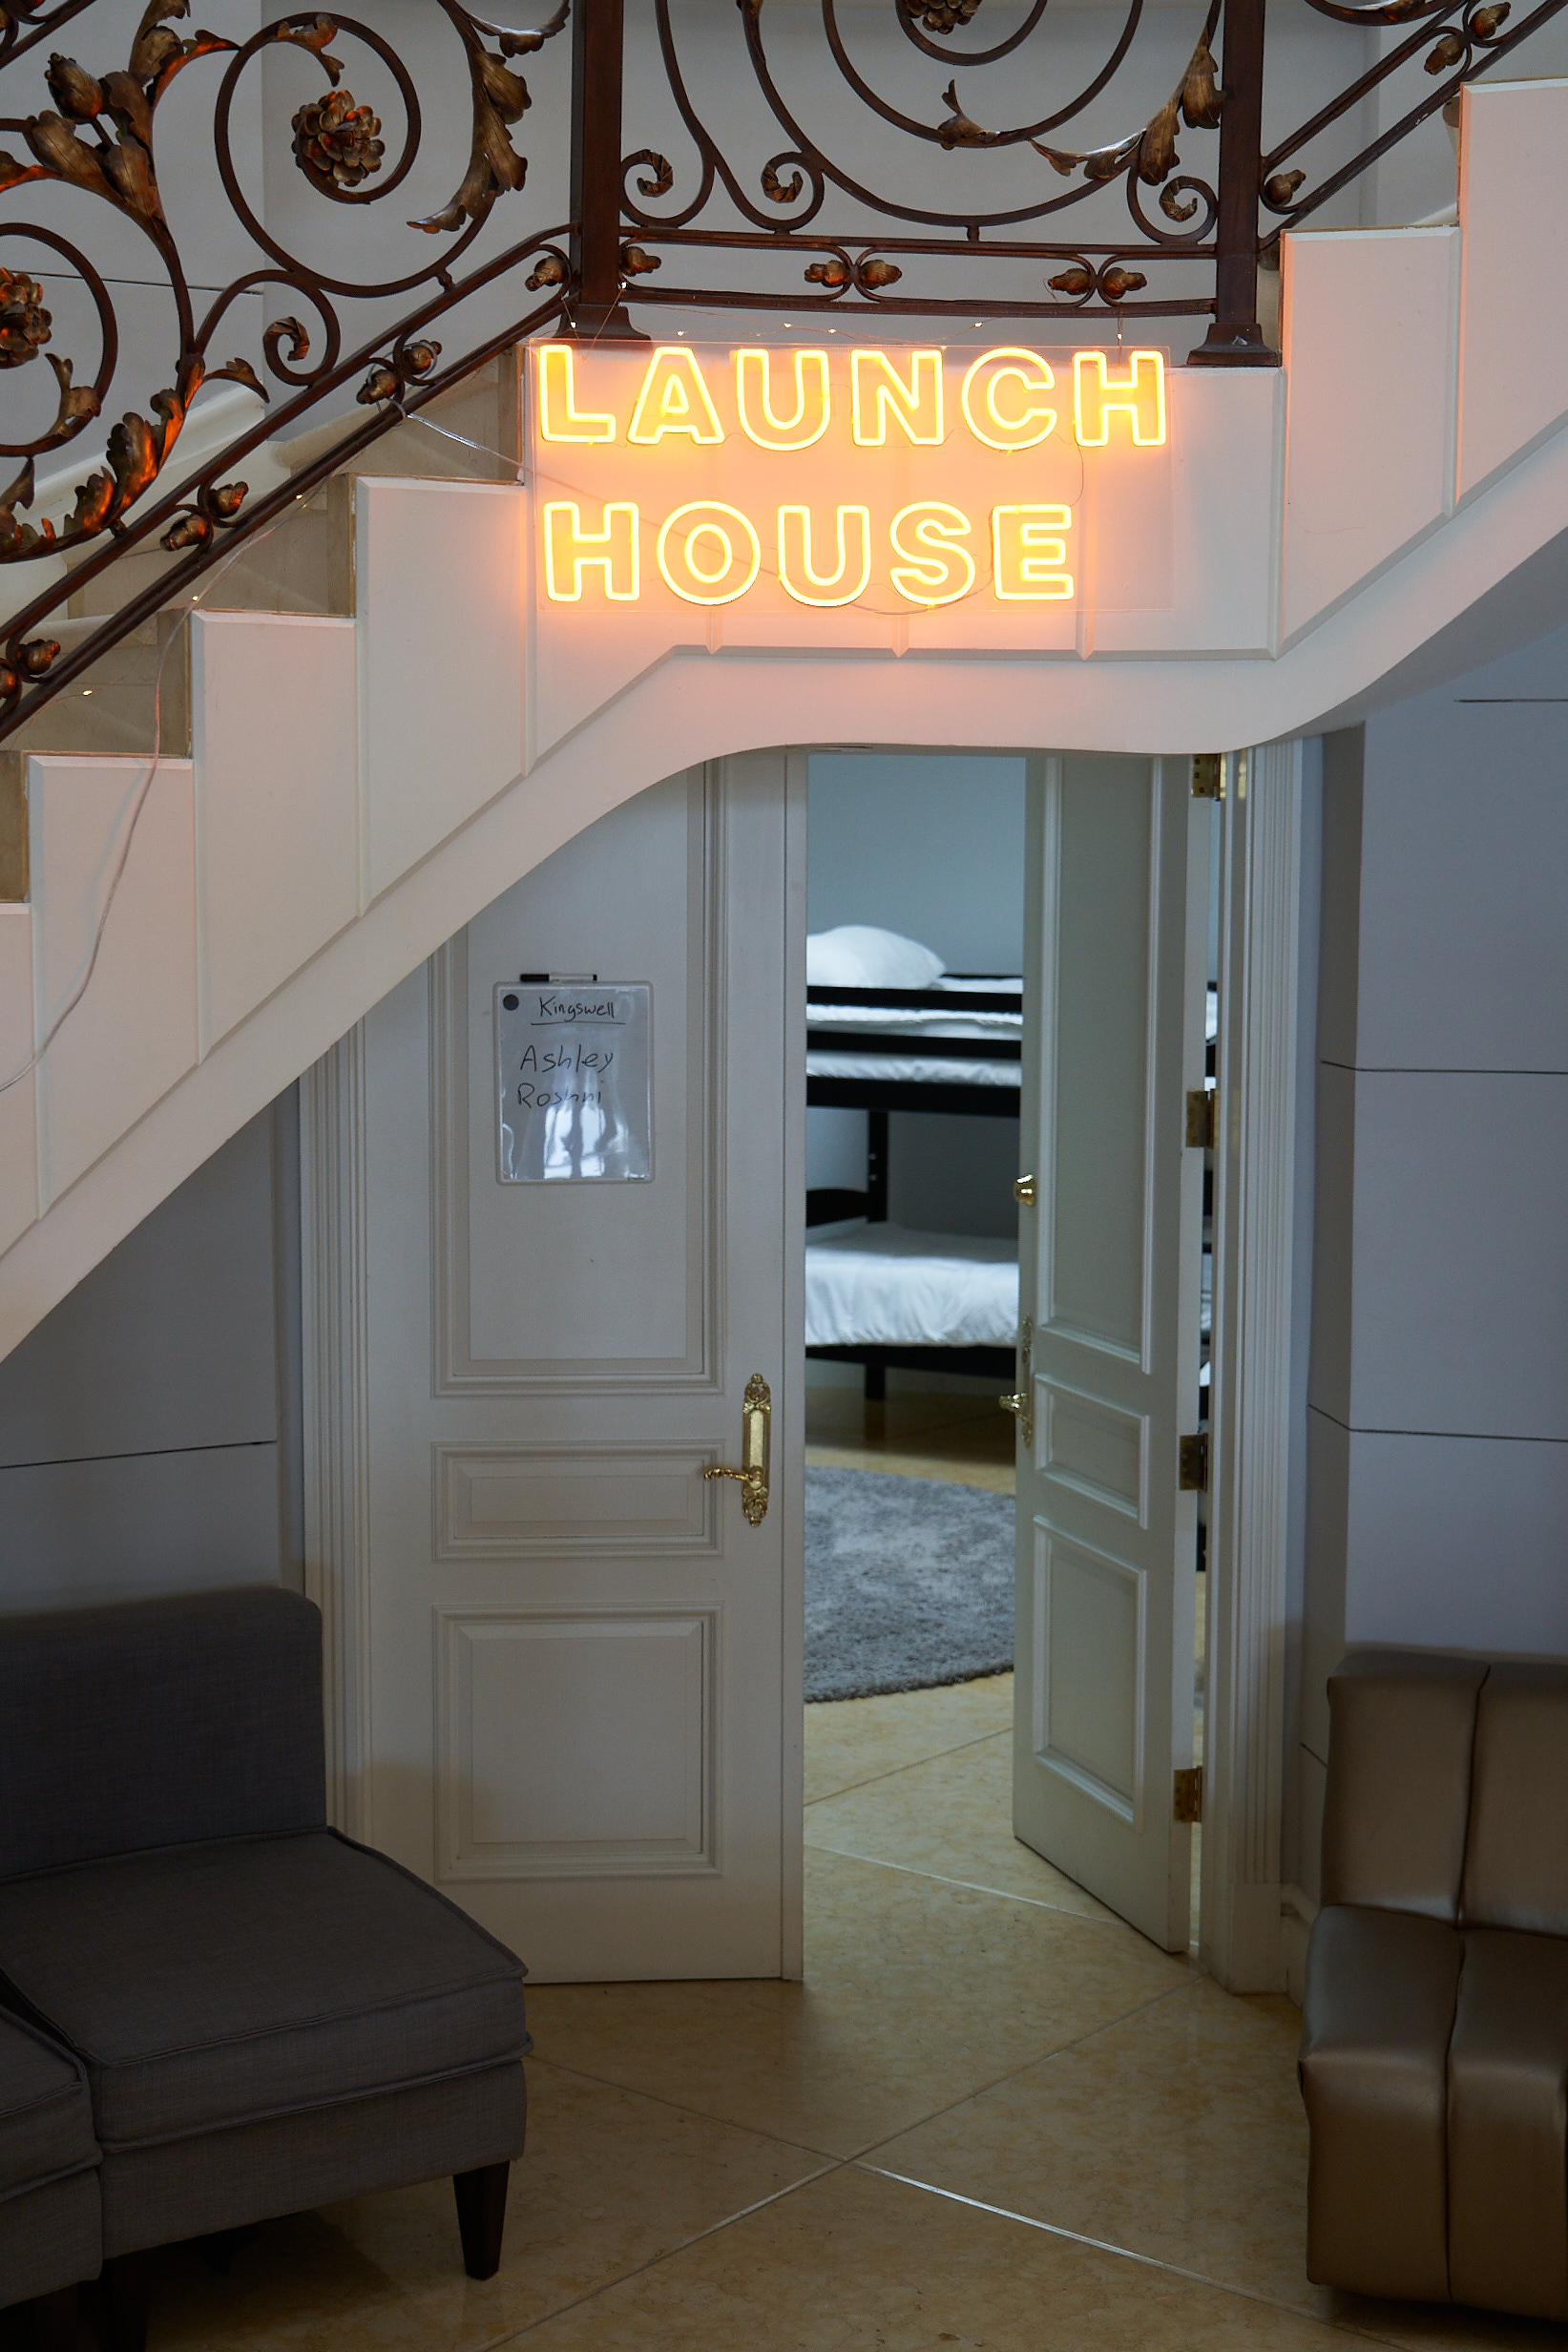 A neon sign that reads “Launch House” mounted on the side of an indoor staircase.